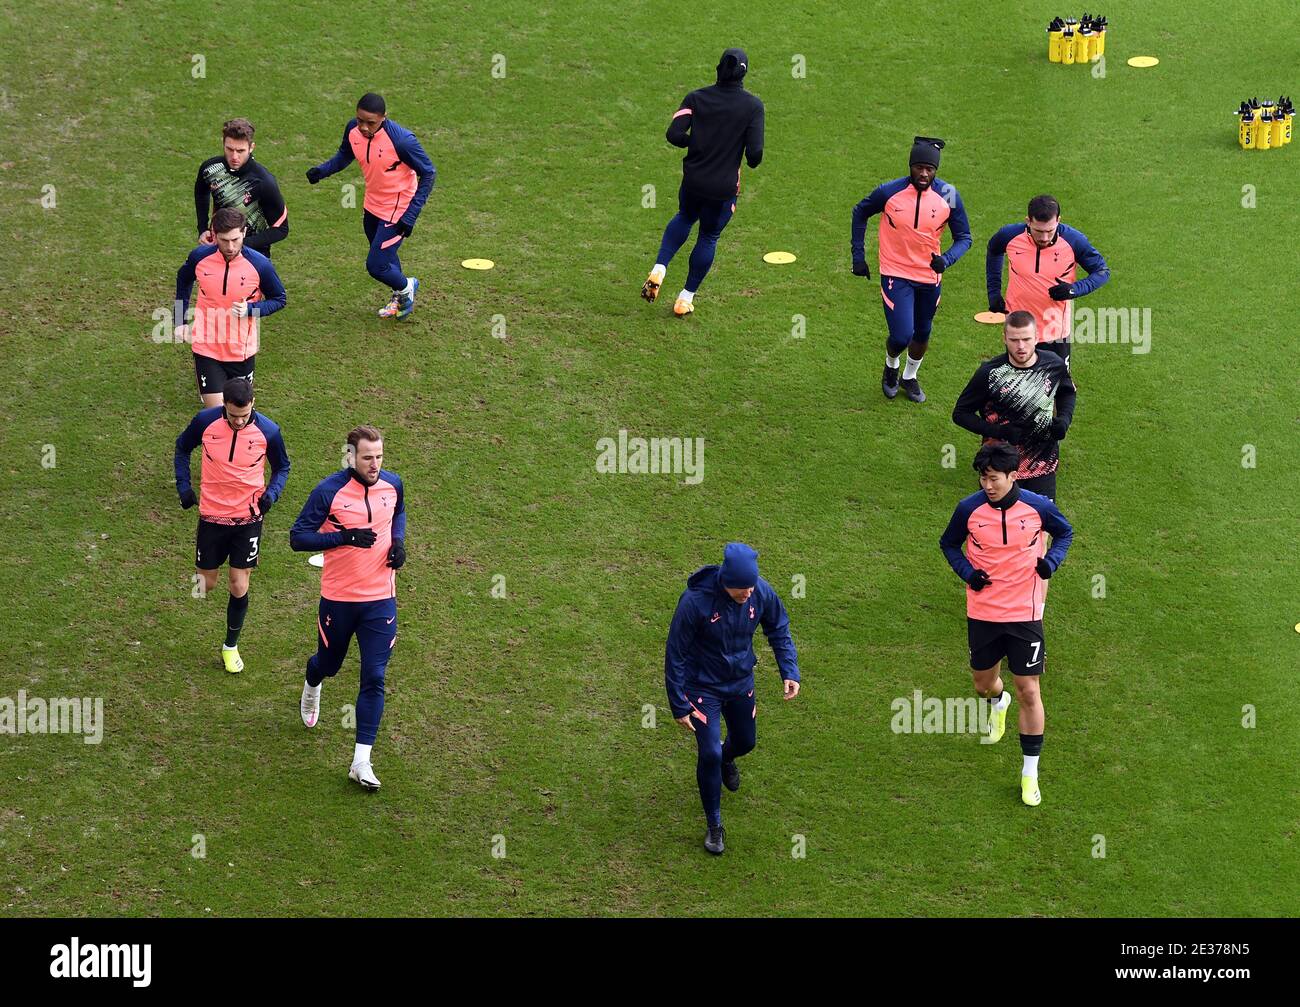 Tottenham Hotspur players warm up on the pitch before the Premier League match at Bramall Lane, Sheffield. Stock Photo